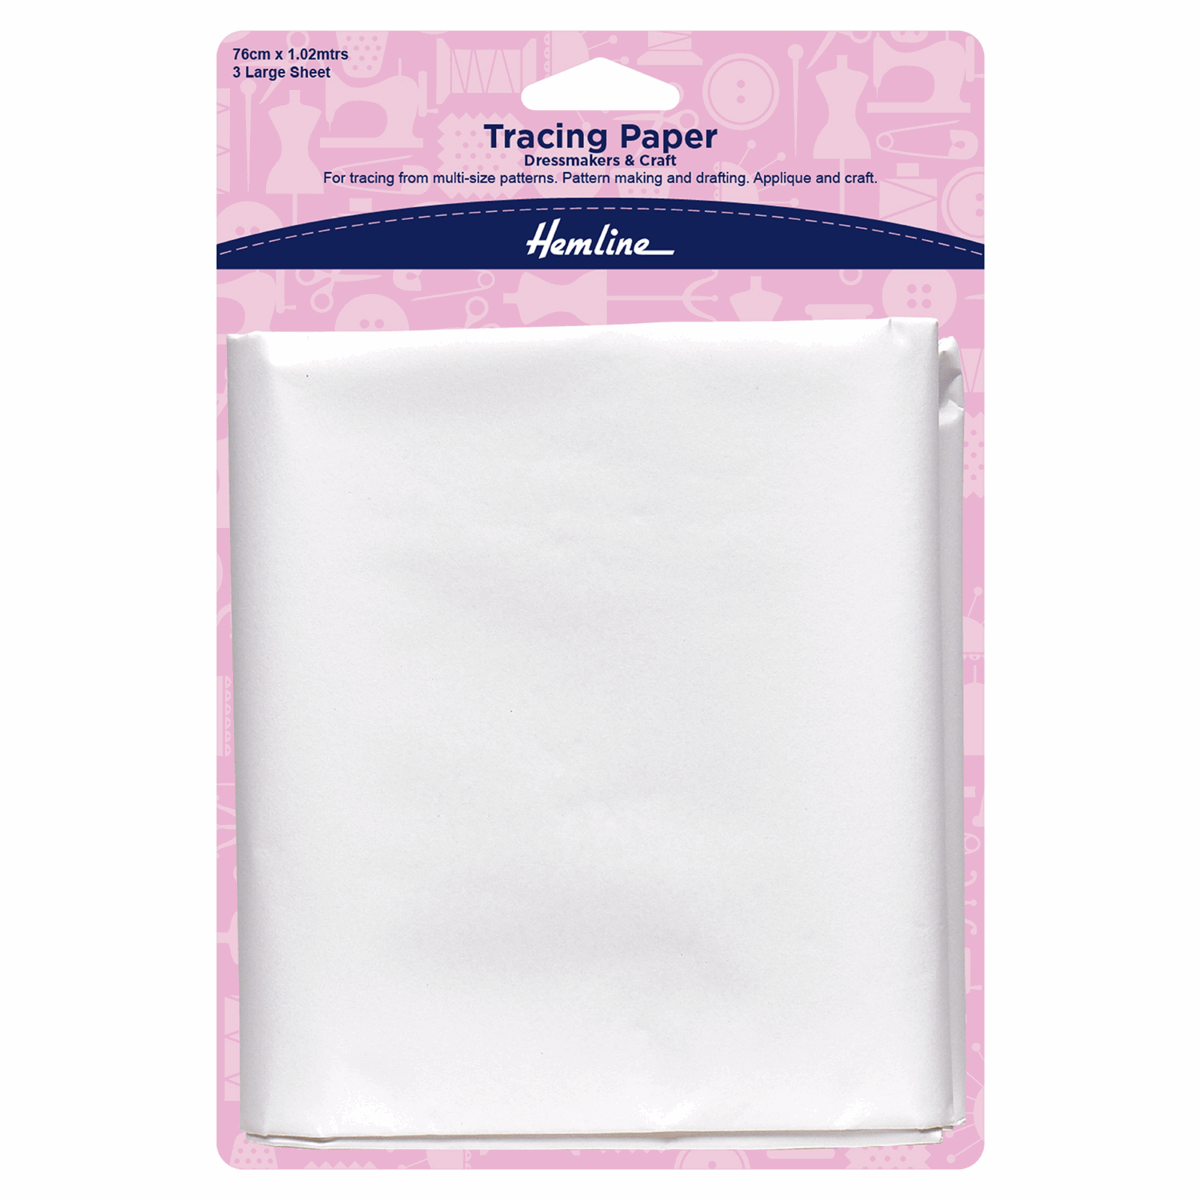 Dressmaking Tracing Paper - 3 Large Sheet 76cm x 1.02mtrs